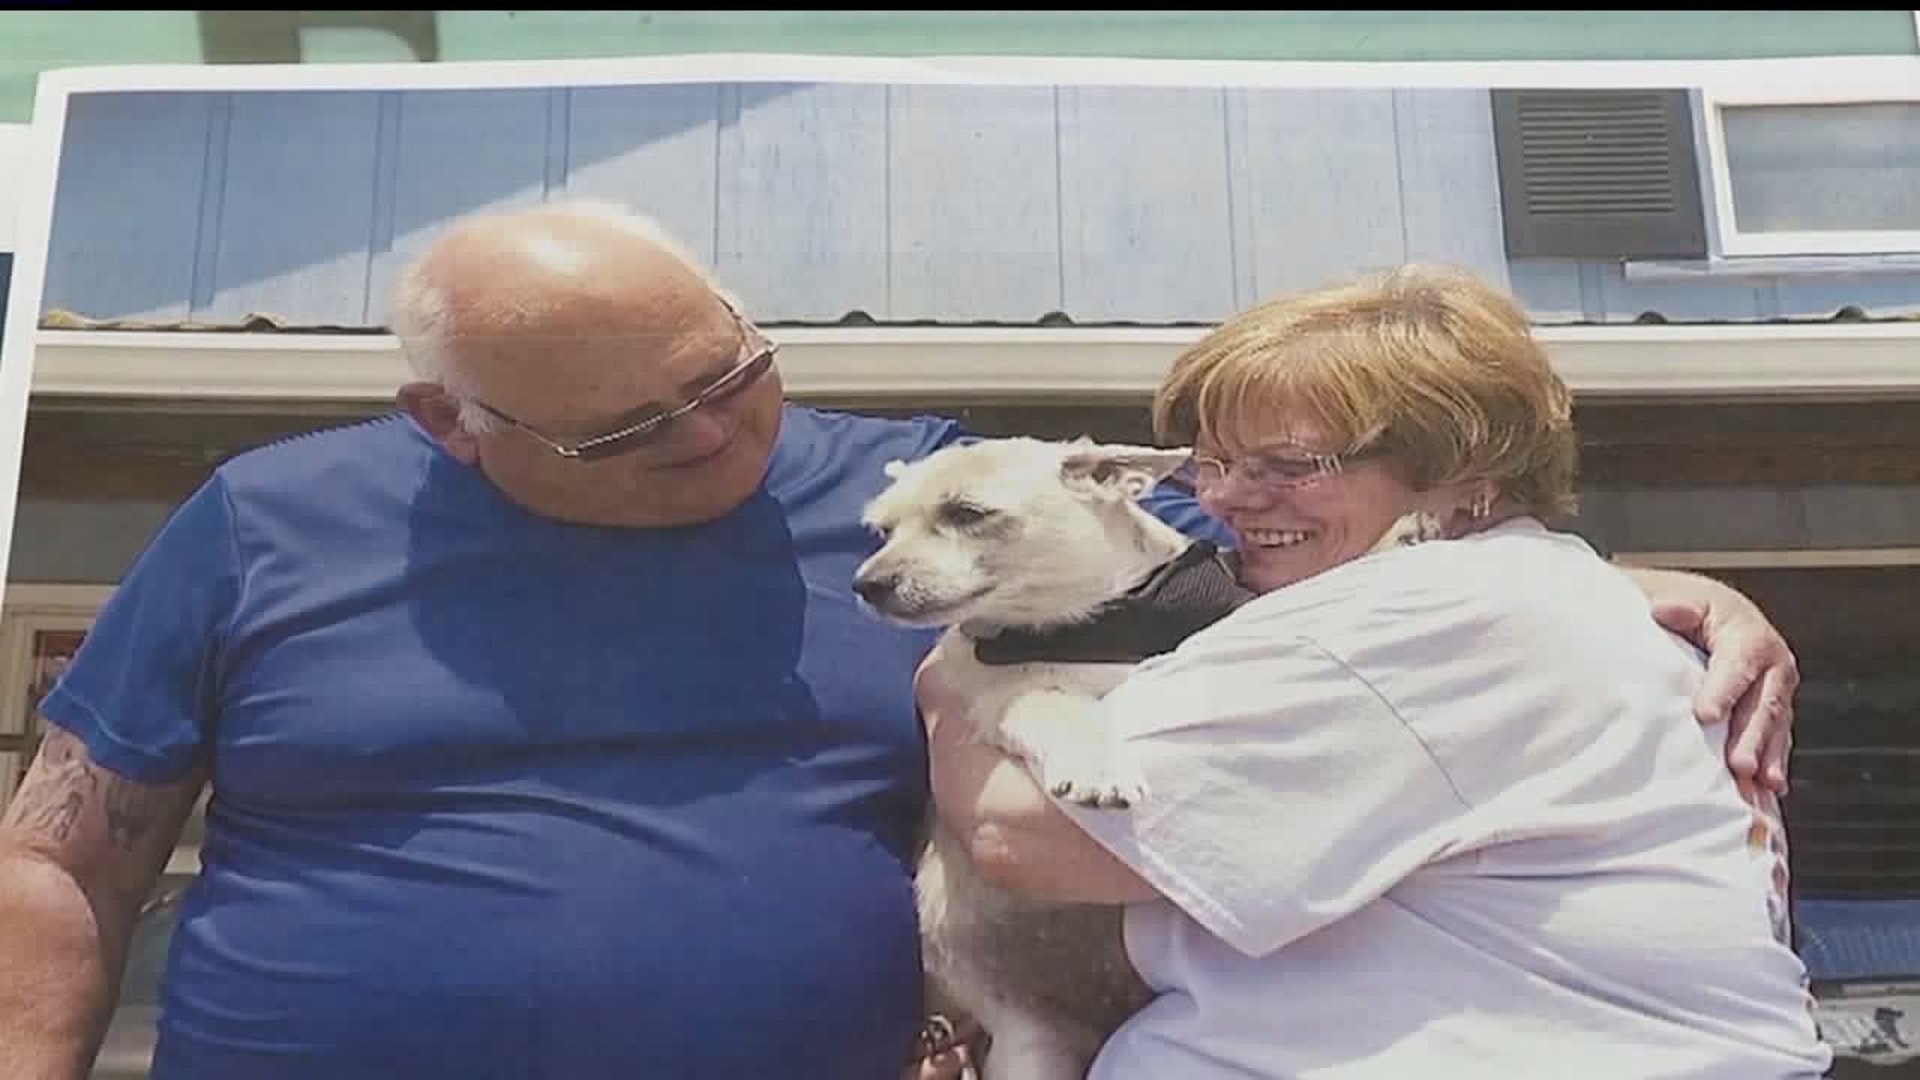 Family wants justice for stolen dog